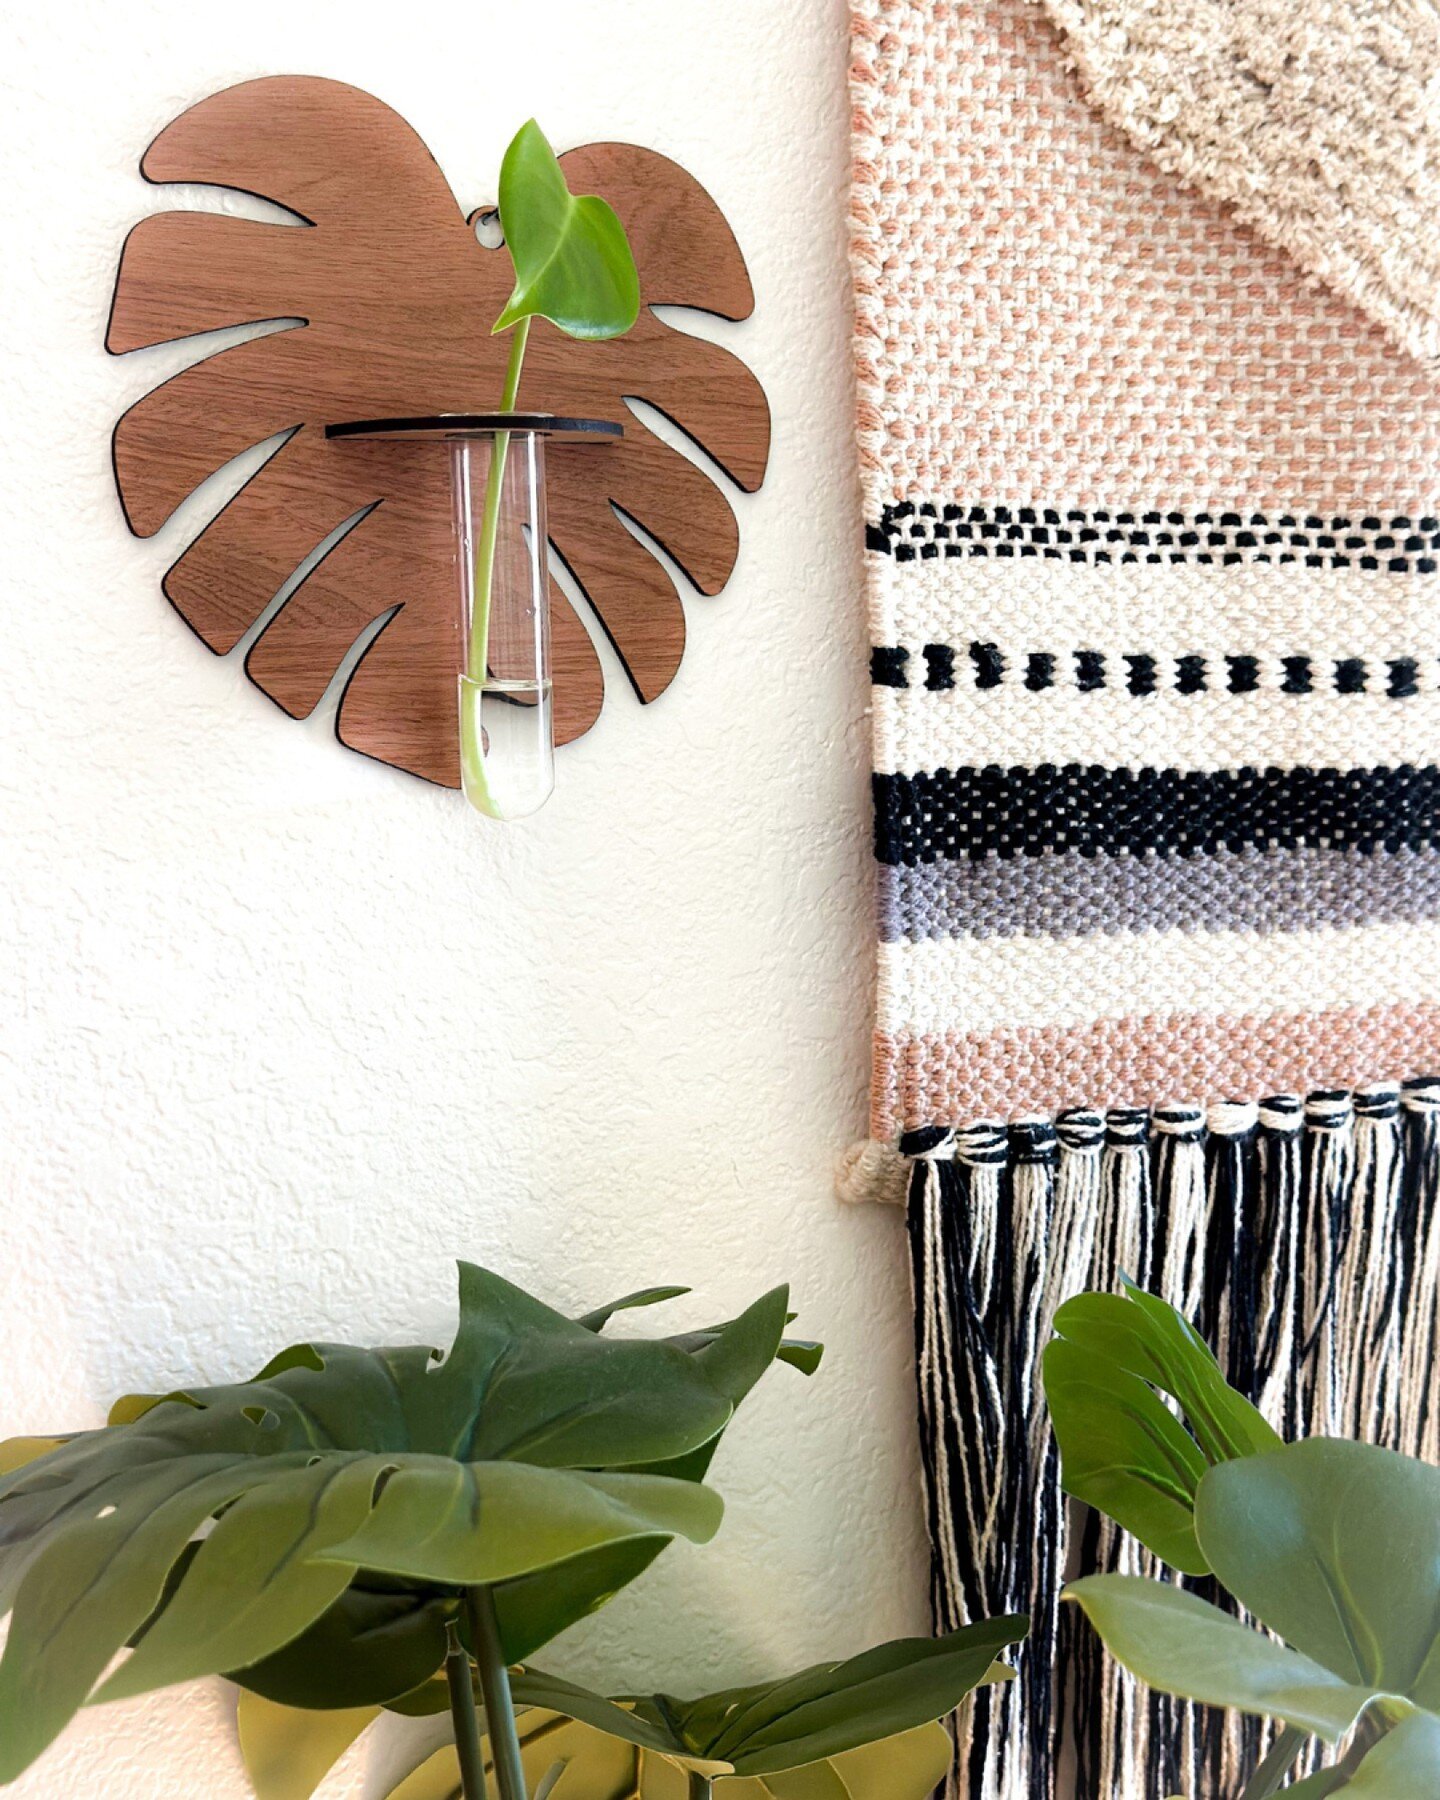 Another peek at what we're making this month in Project Members! 

Have you ever successfully propagated a plant before? I sure have not. I've always been a green thumb wannabe. But maybe this year is the year. I designed these wall decor pieces that